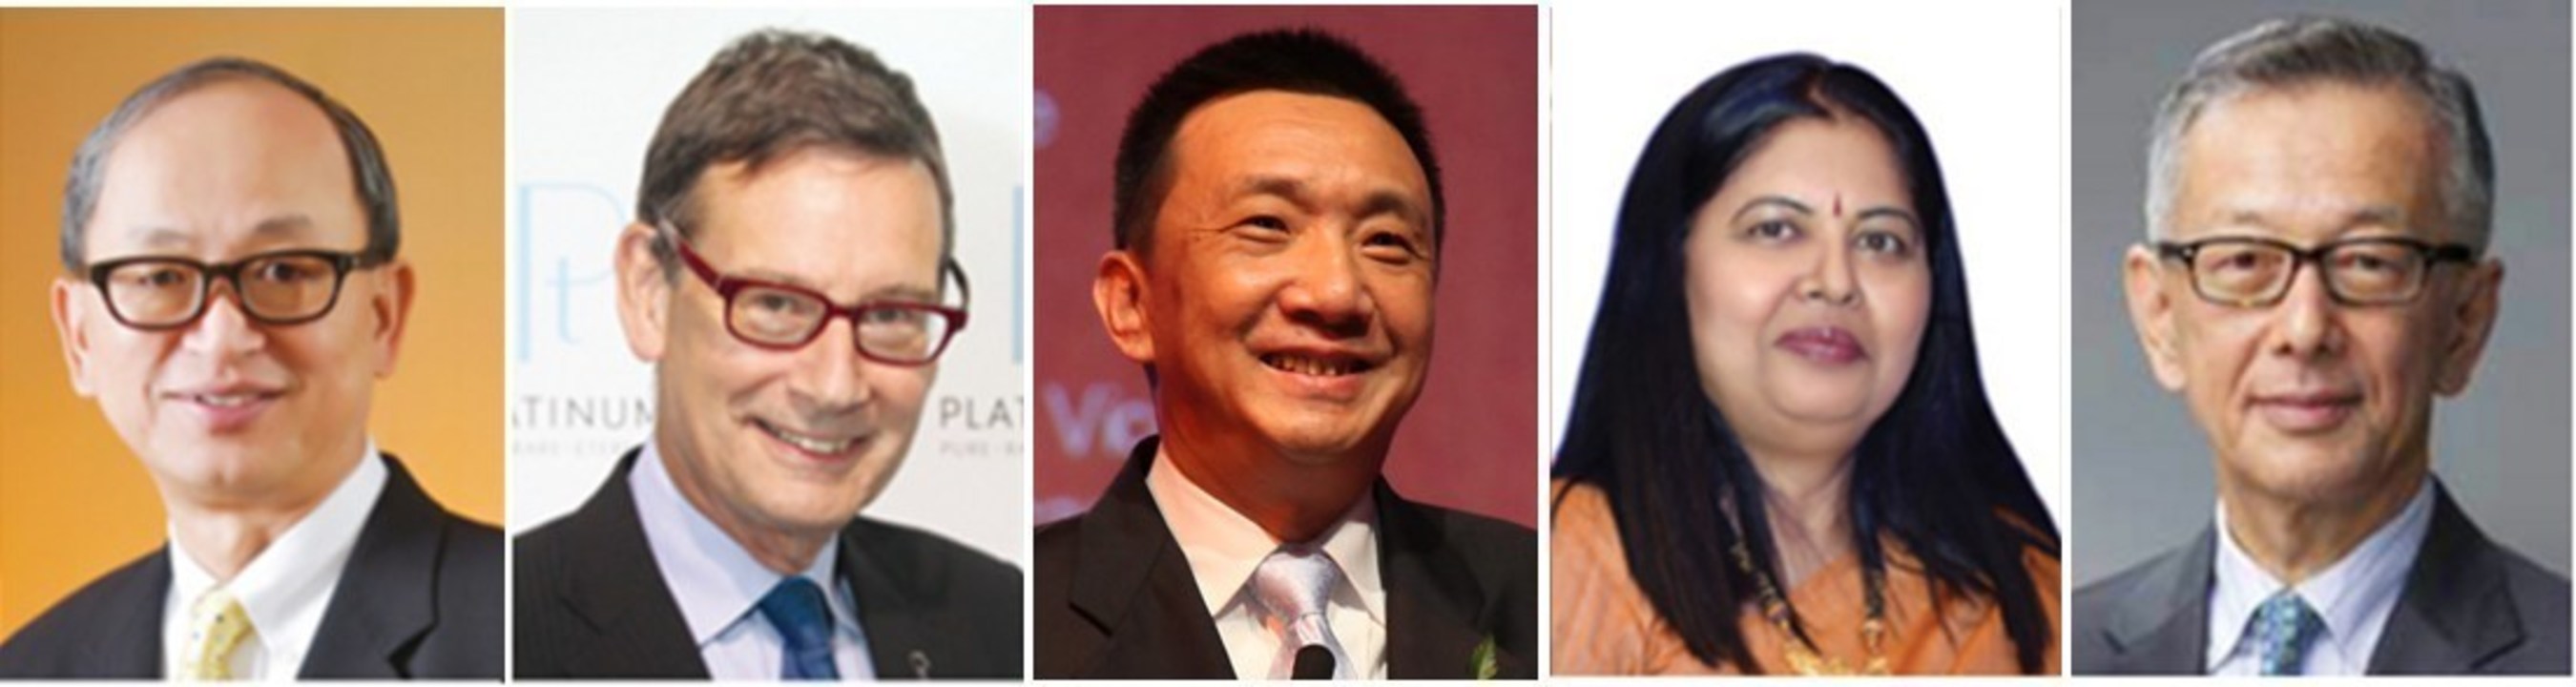 (From left) Albert Cheng, Advisor to the World Gold Council, Far East (WGC); James Courage, former Chief Executive of Platinum Guild International (PGI); Lin Qiang, President and Managing Director of the Shanghai Diamond Exchange (SDE); Nirupa Bhatt, Managing Director of Gemological Institute of America (GIA) India and the Middle East; and Yasukazu Suwa, Chairman of Suwa & Son, Inc in Japan